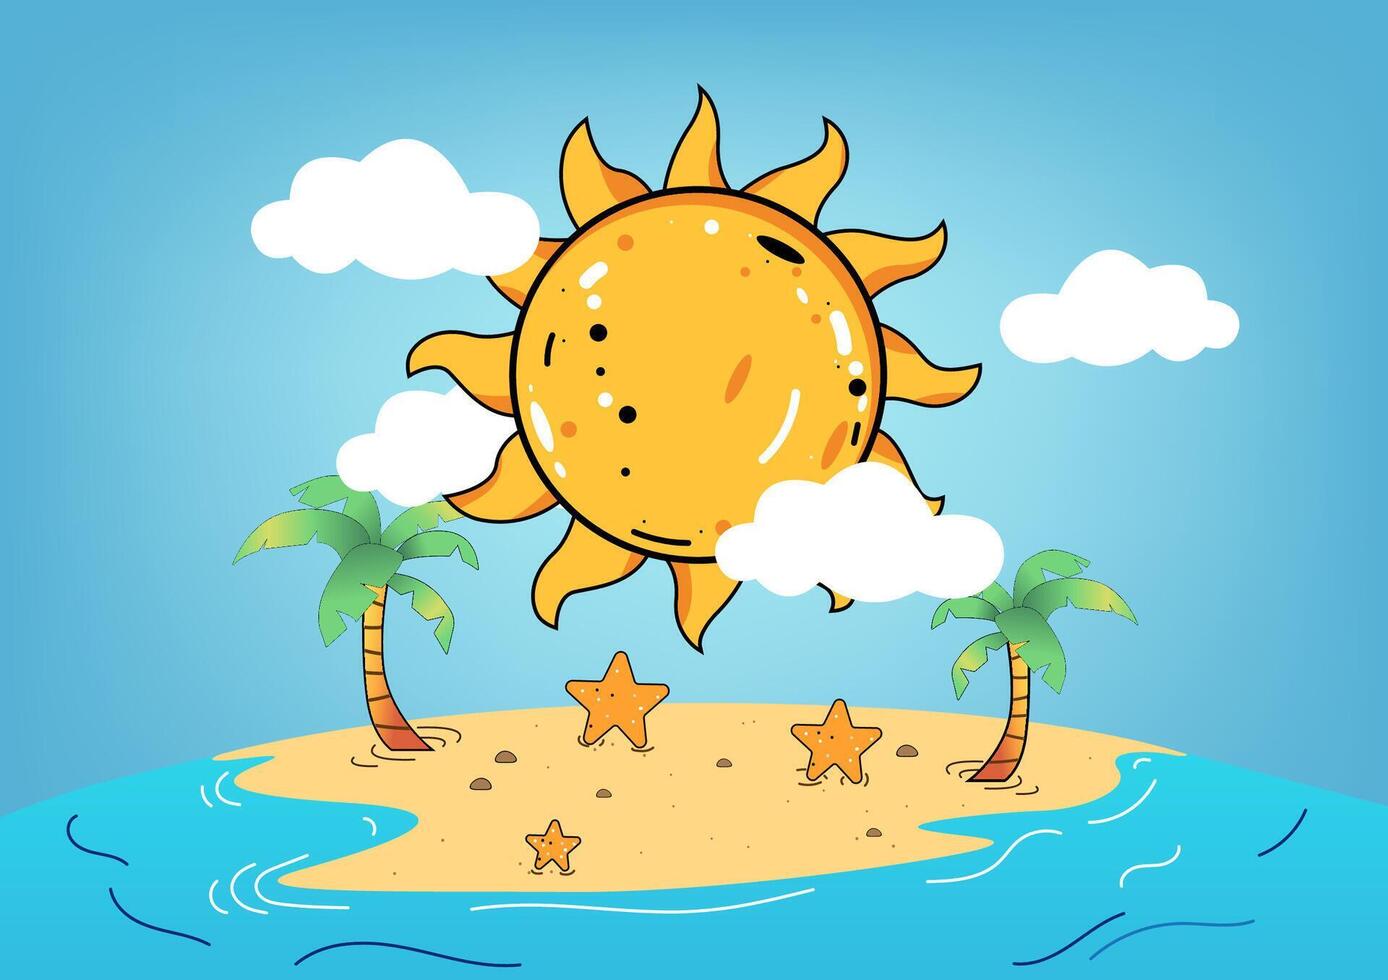 Cartoon vector illustration of the sun in the sky, with clouds casting rays onto a beach dotted with starfish and waves crashing against the shore. artwork  beauty of a sunny day at the beach